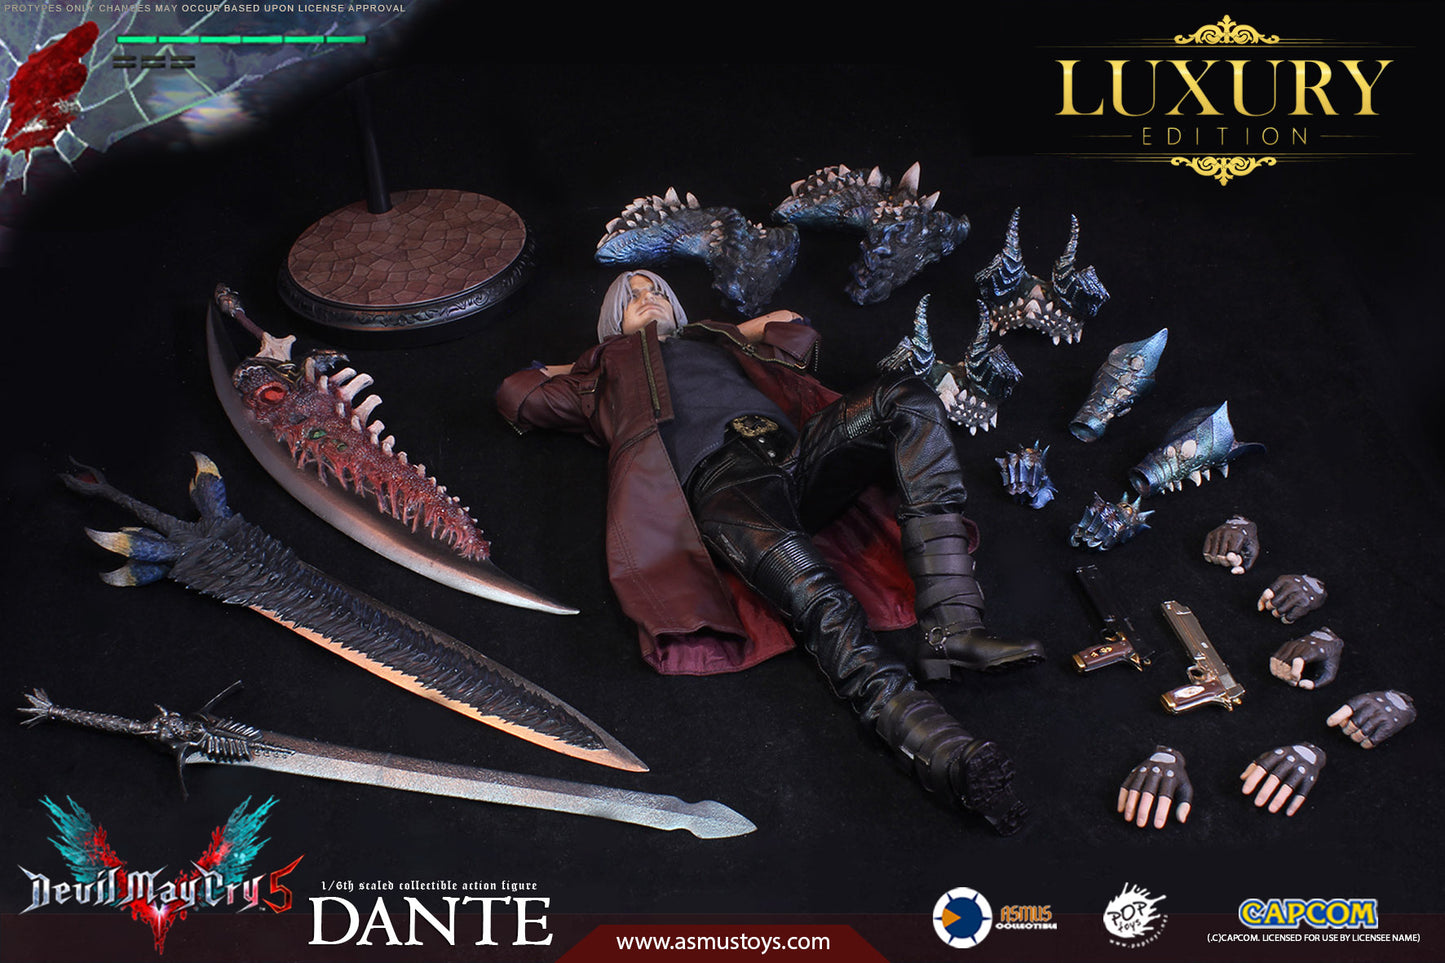 Asmus Toys DMC502LUX - The Devil May Cry 5 - Dante Luxury Edition